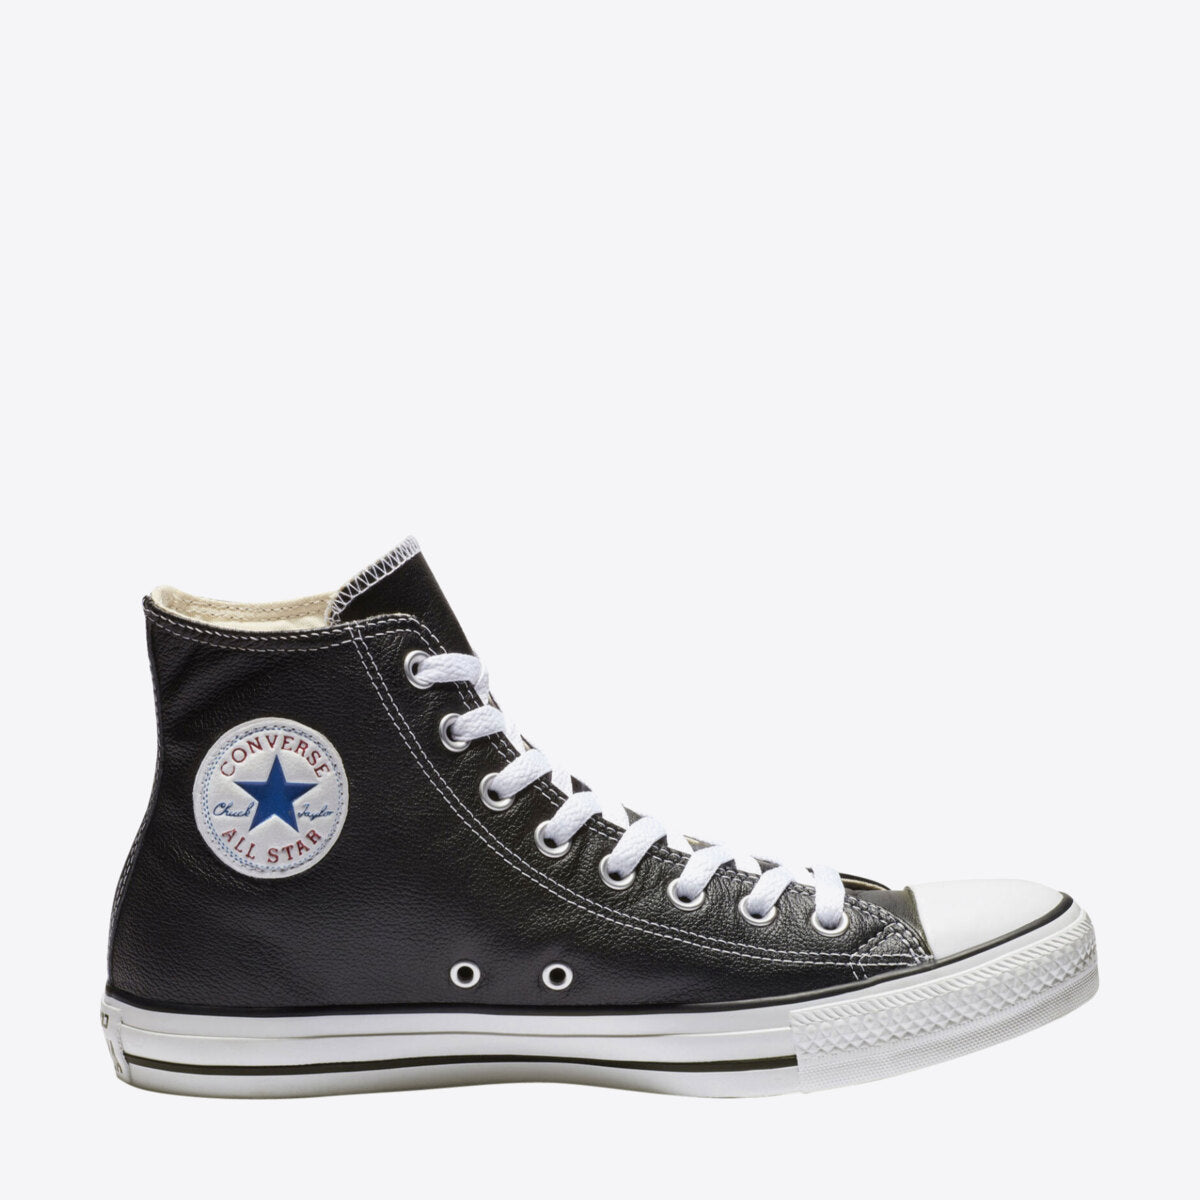 CONVERSE Chuck Taylor All Star Leather High Black - Image 2